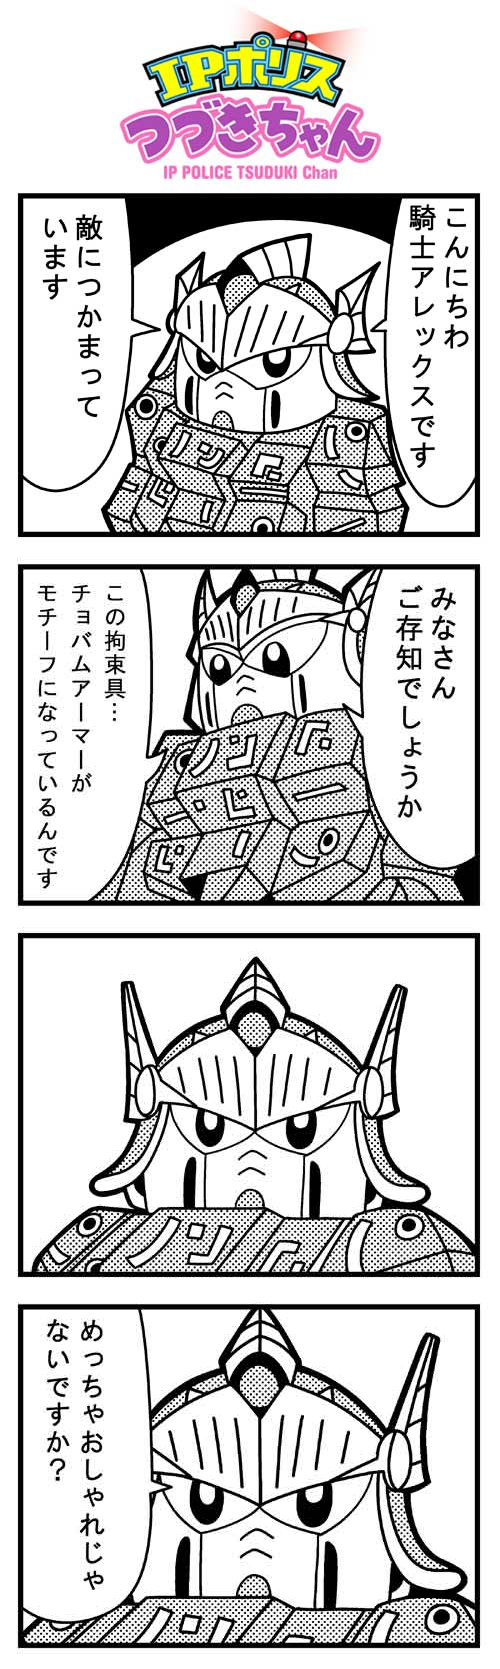 4koma armor bkub character_request comic greyscale helmet highres ip_police_tsuduki_chan looking_at_viewer looking_down mecha monochrome no_humans sd_gundam_gaiden simple_background speech_bubble talking translation_request two-tone_background